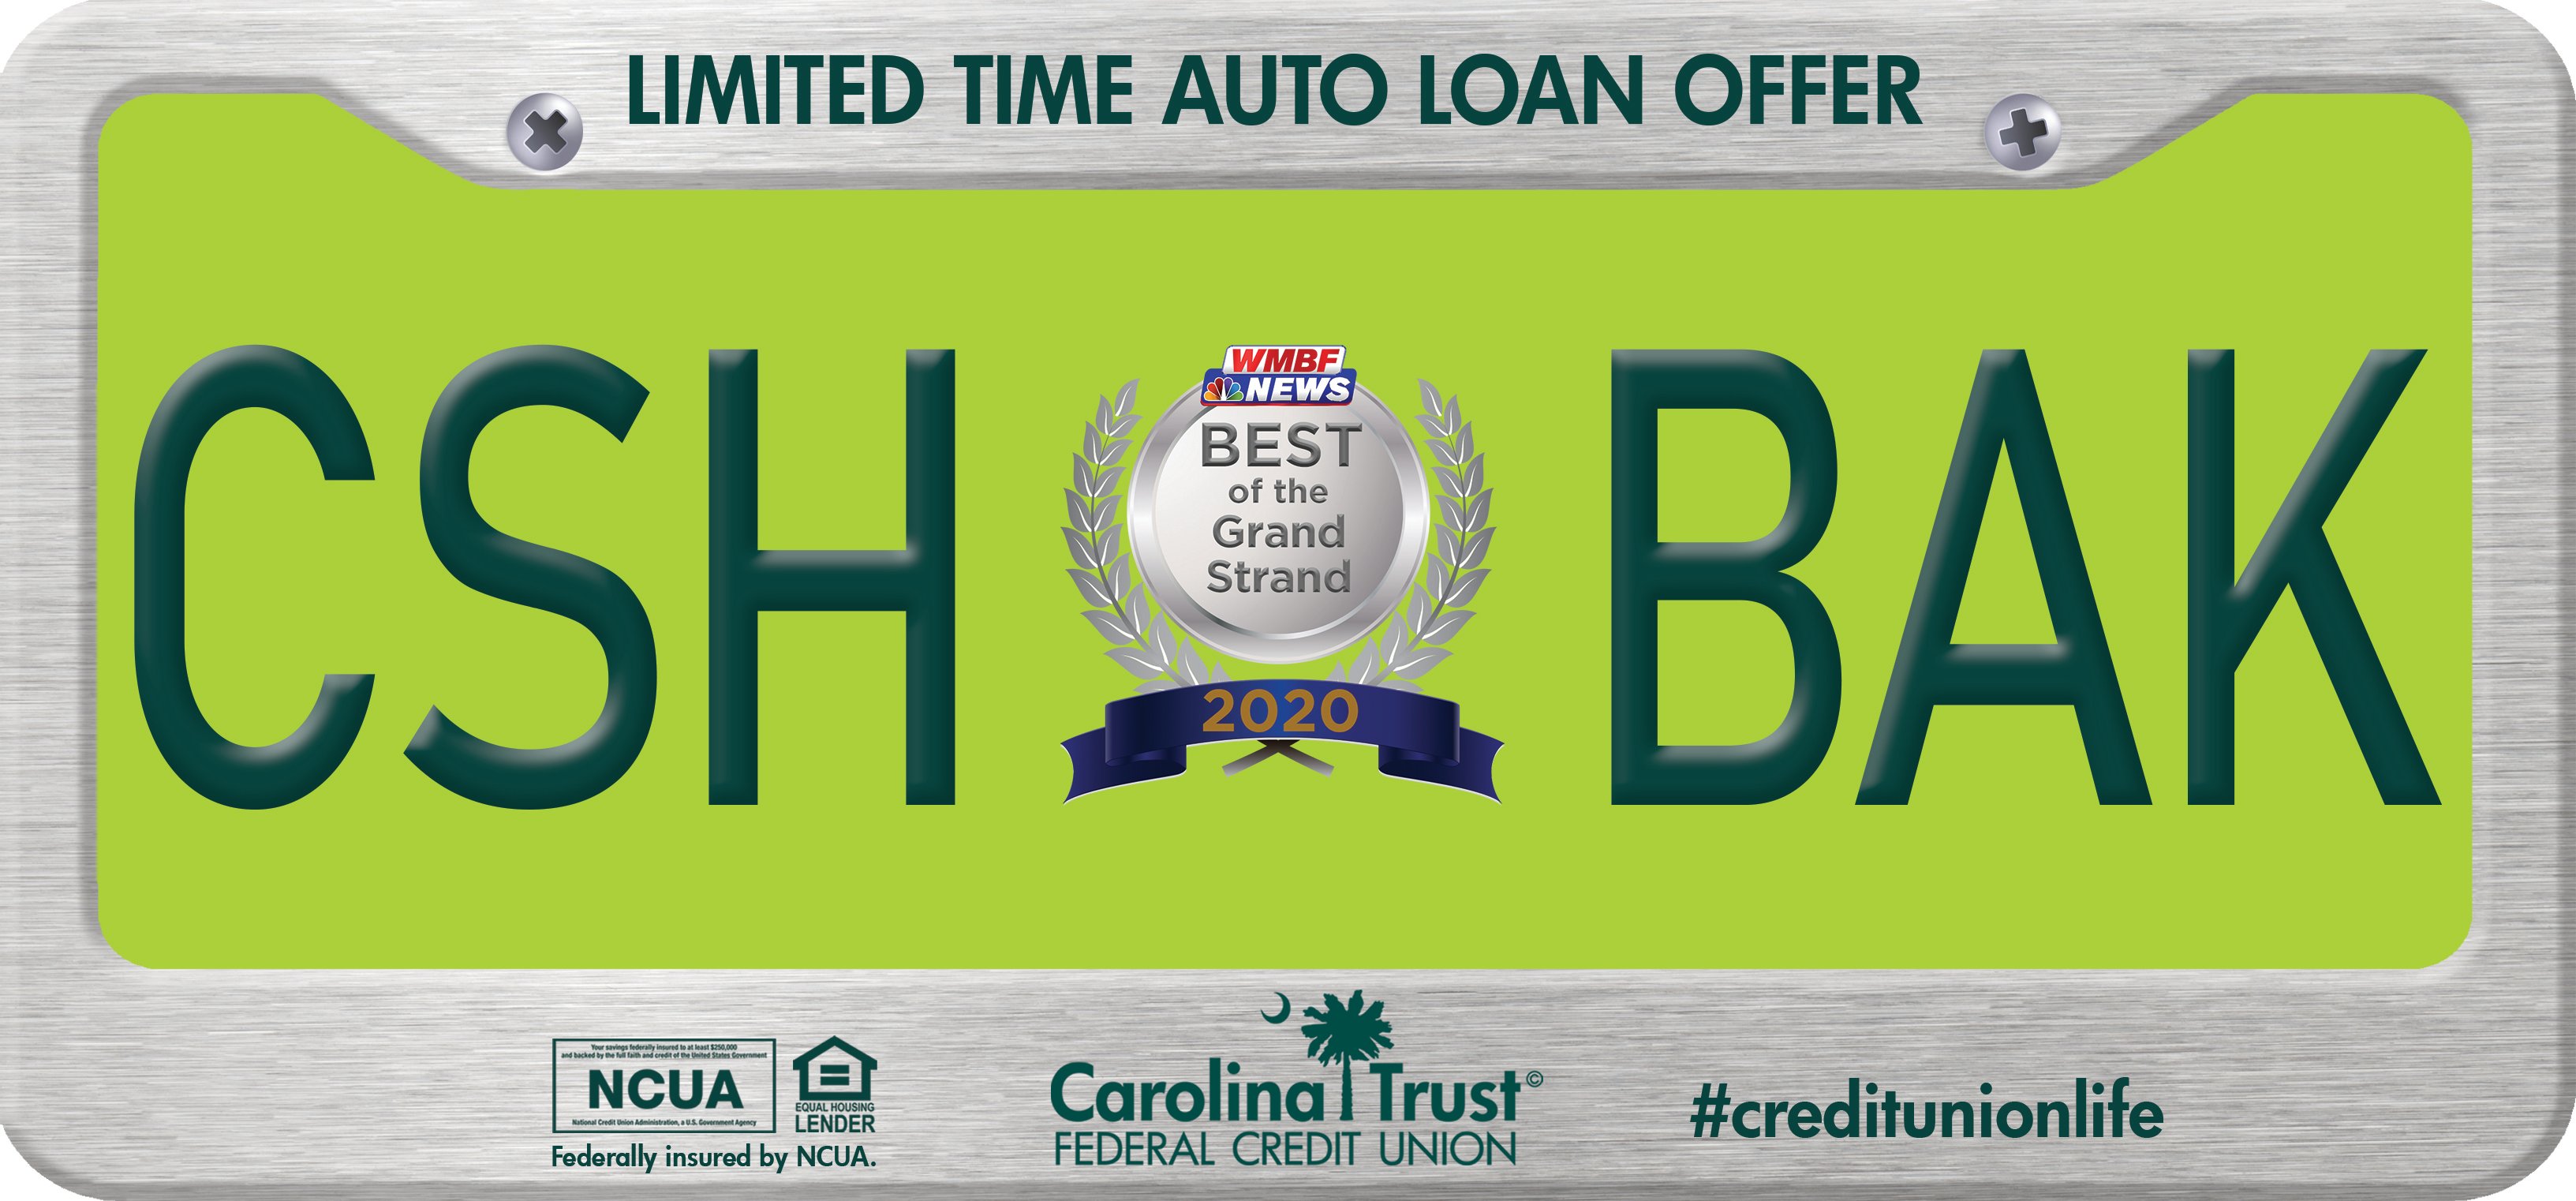 Blog - Best in Banking - Auto Offer